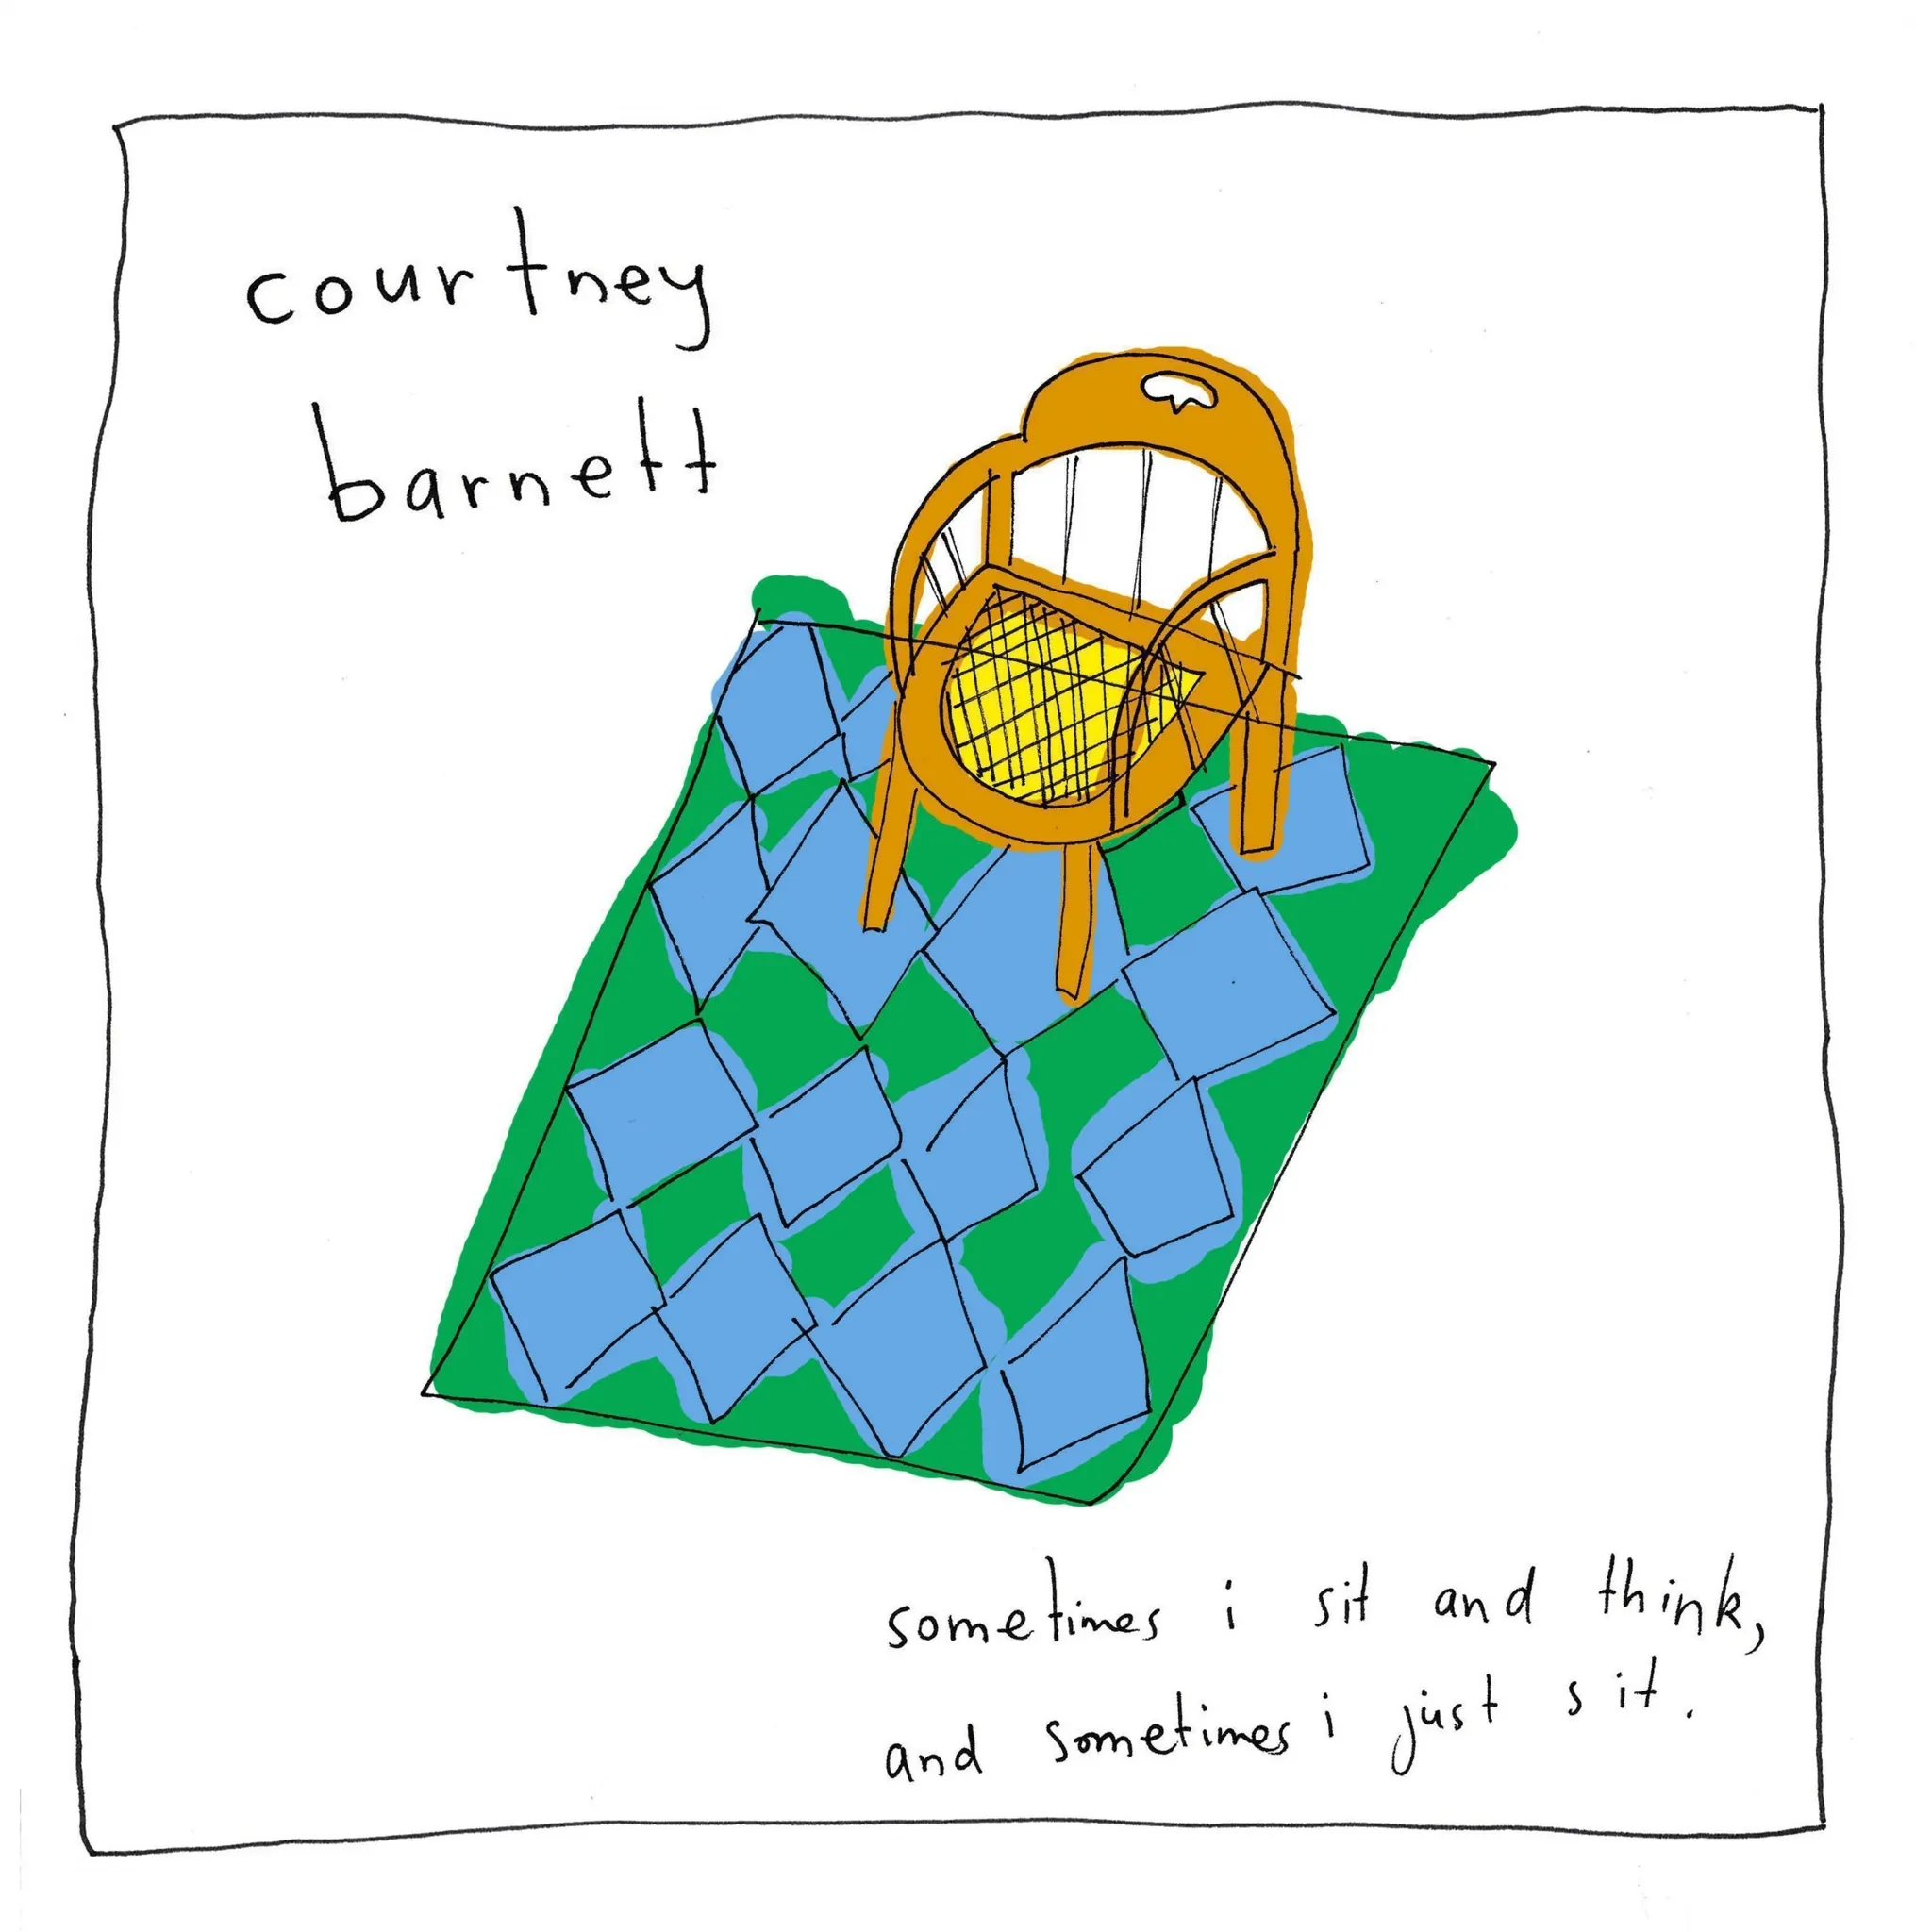 <strong>Courtney Barnett - Sometimes I Sit and Think, and Sometimes I Just Sit.</strong> (Vinyl LP)